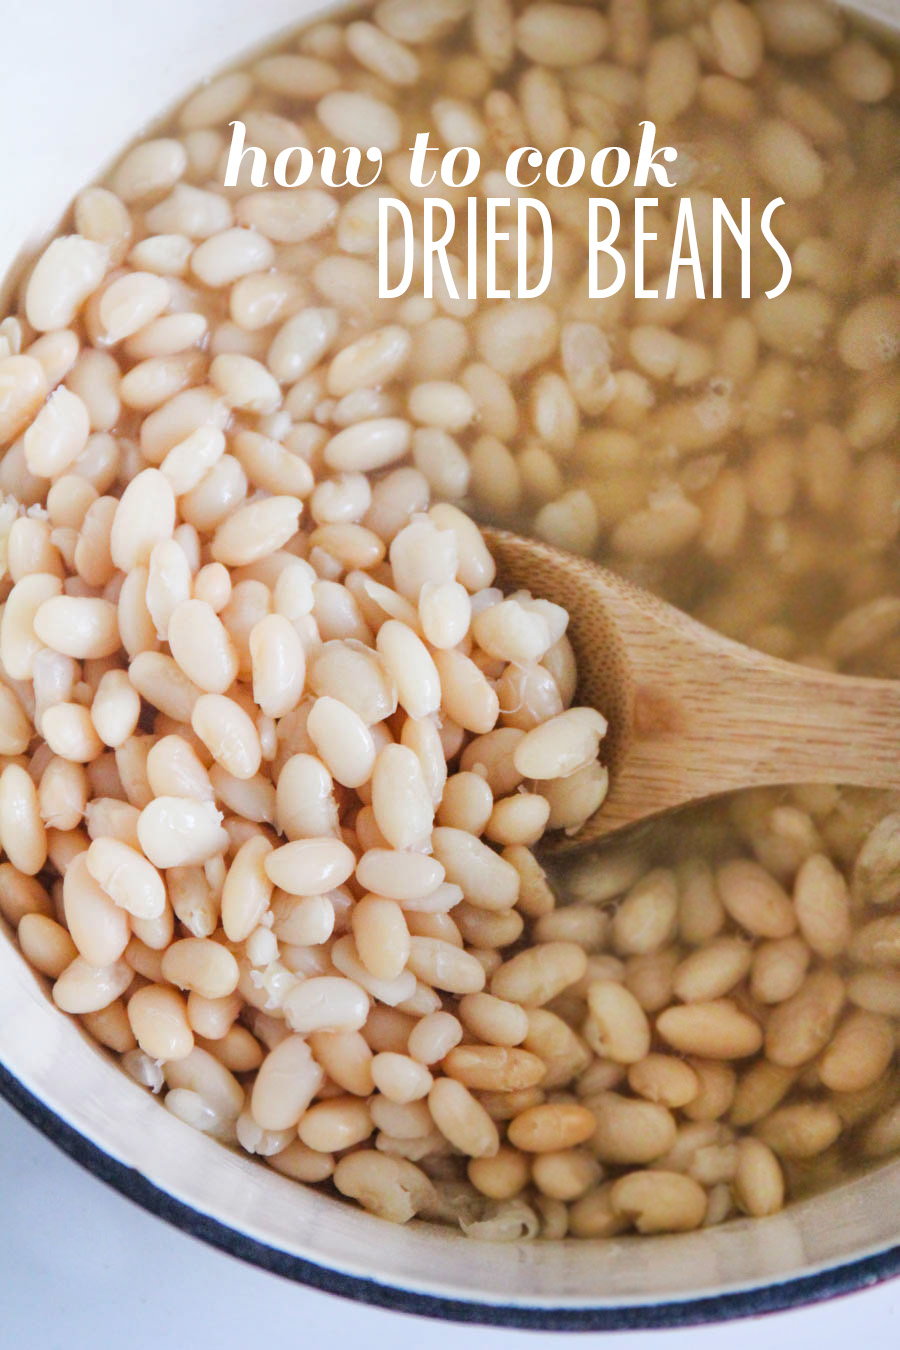 Cooking with dried beans is simple and easy, and a great way to save money in the kitchen!